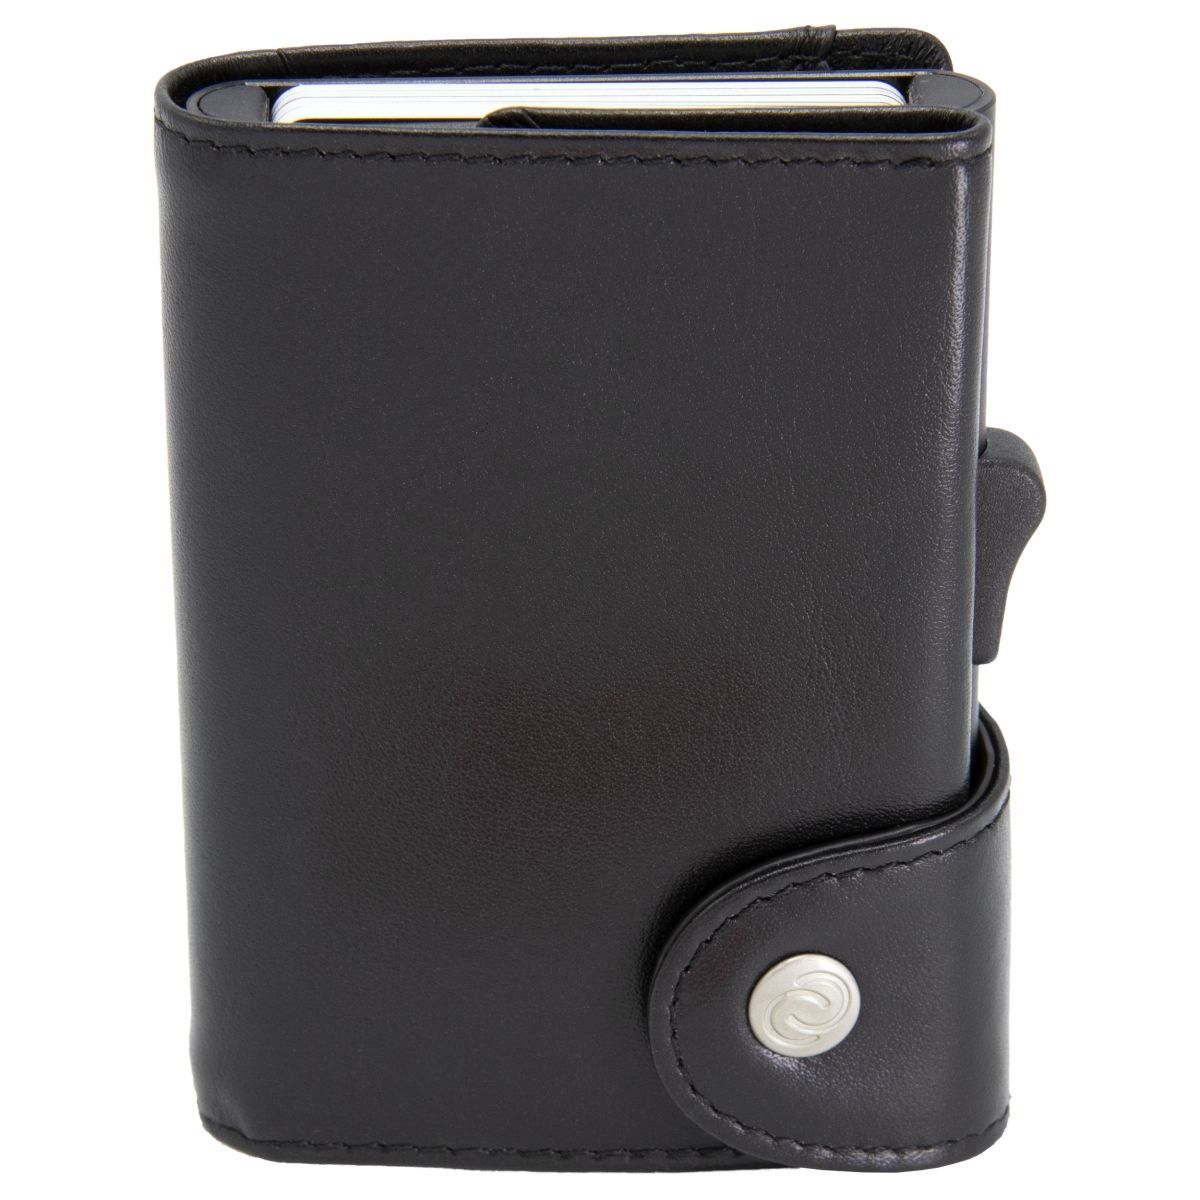 C-Secure XL Aluminum Card Holder with Genuine Leather - Black